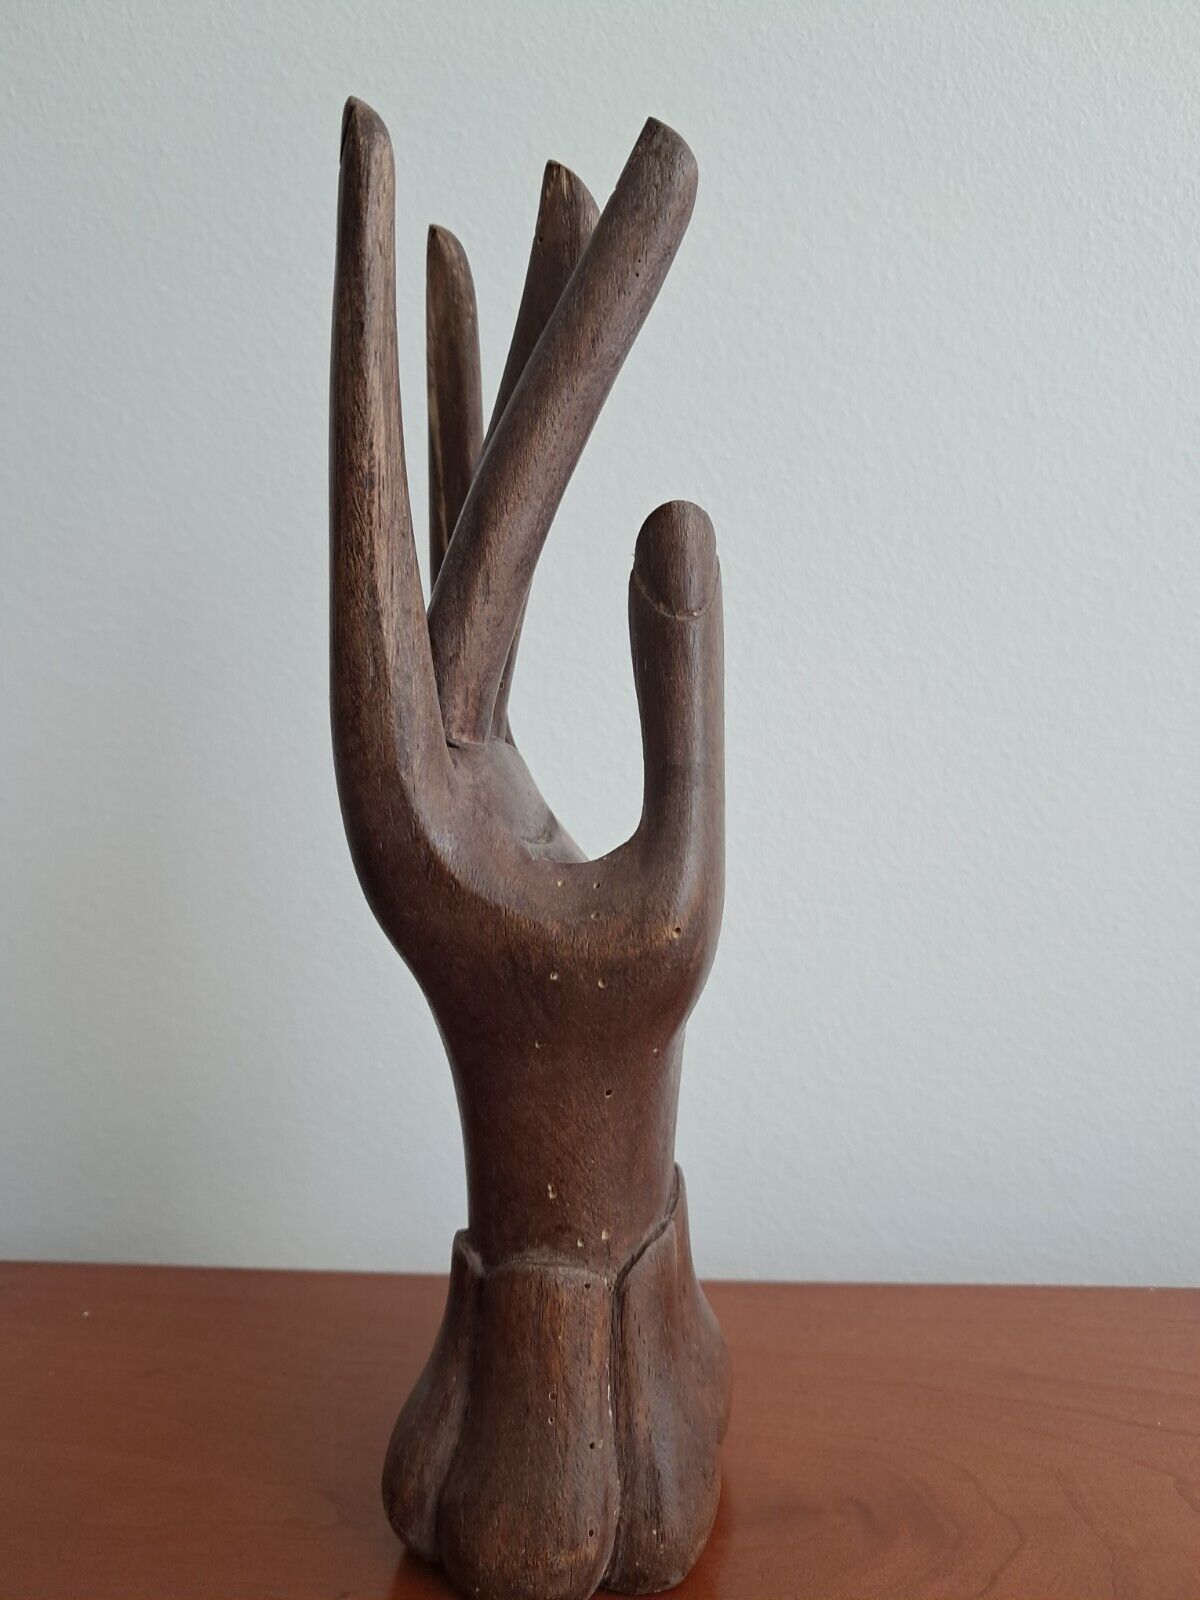 MCM Hand Fingers Wrist Carved Wood Sculpture Hand